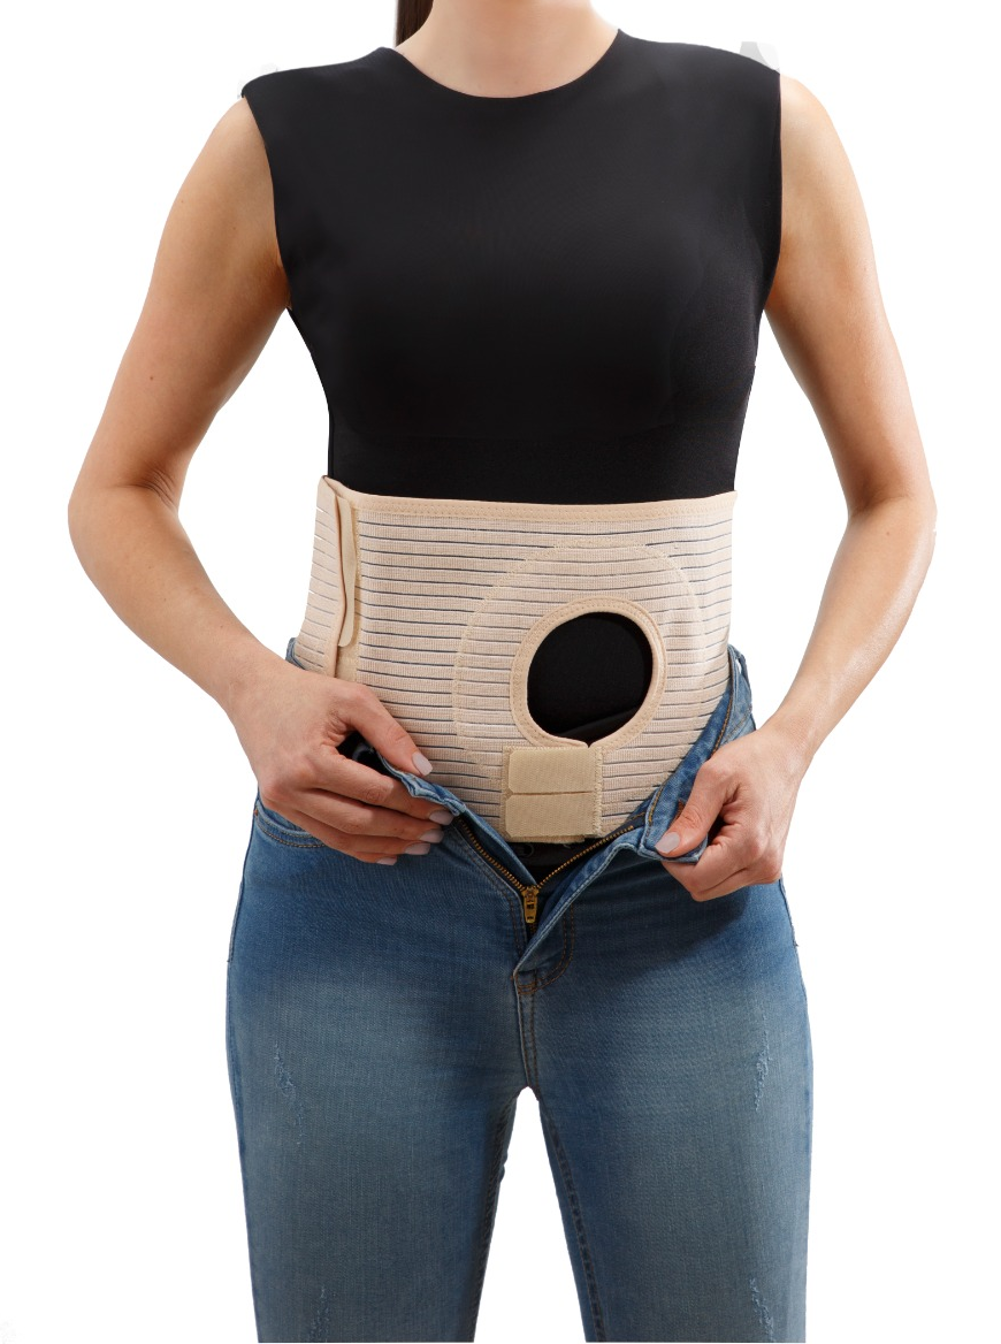 Compare Our Ostomy Products, All Belt Styles